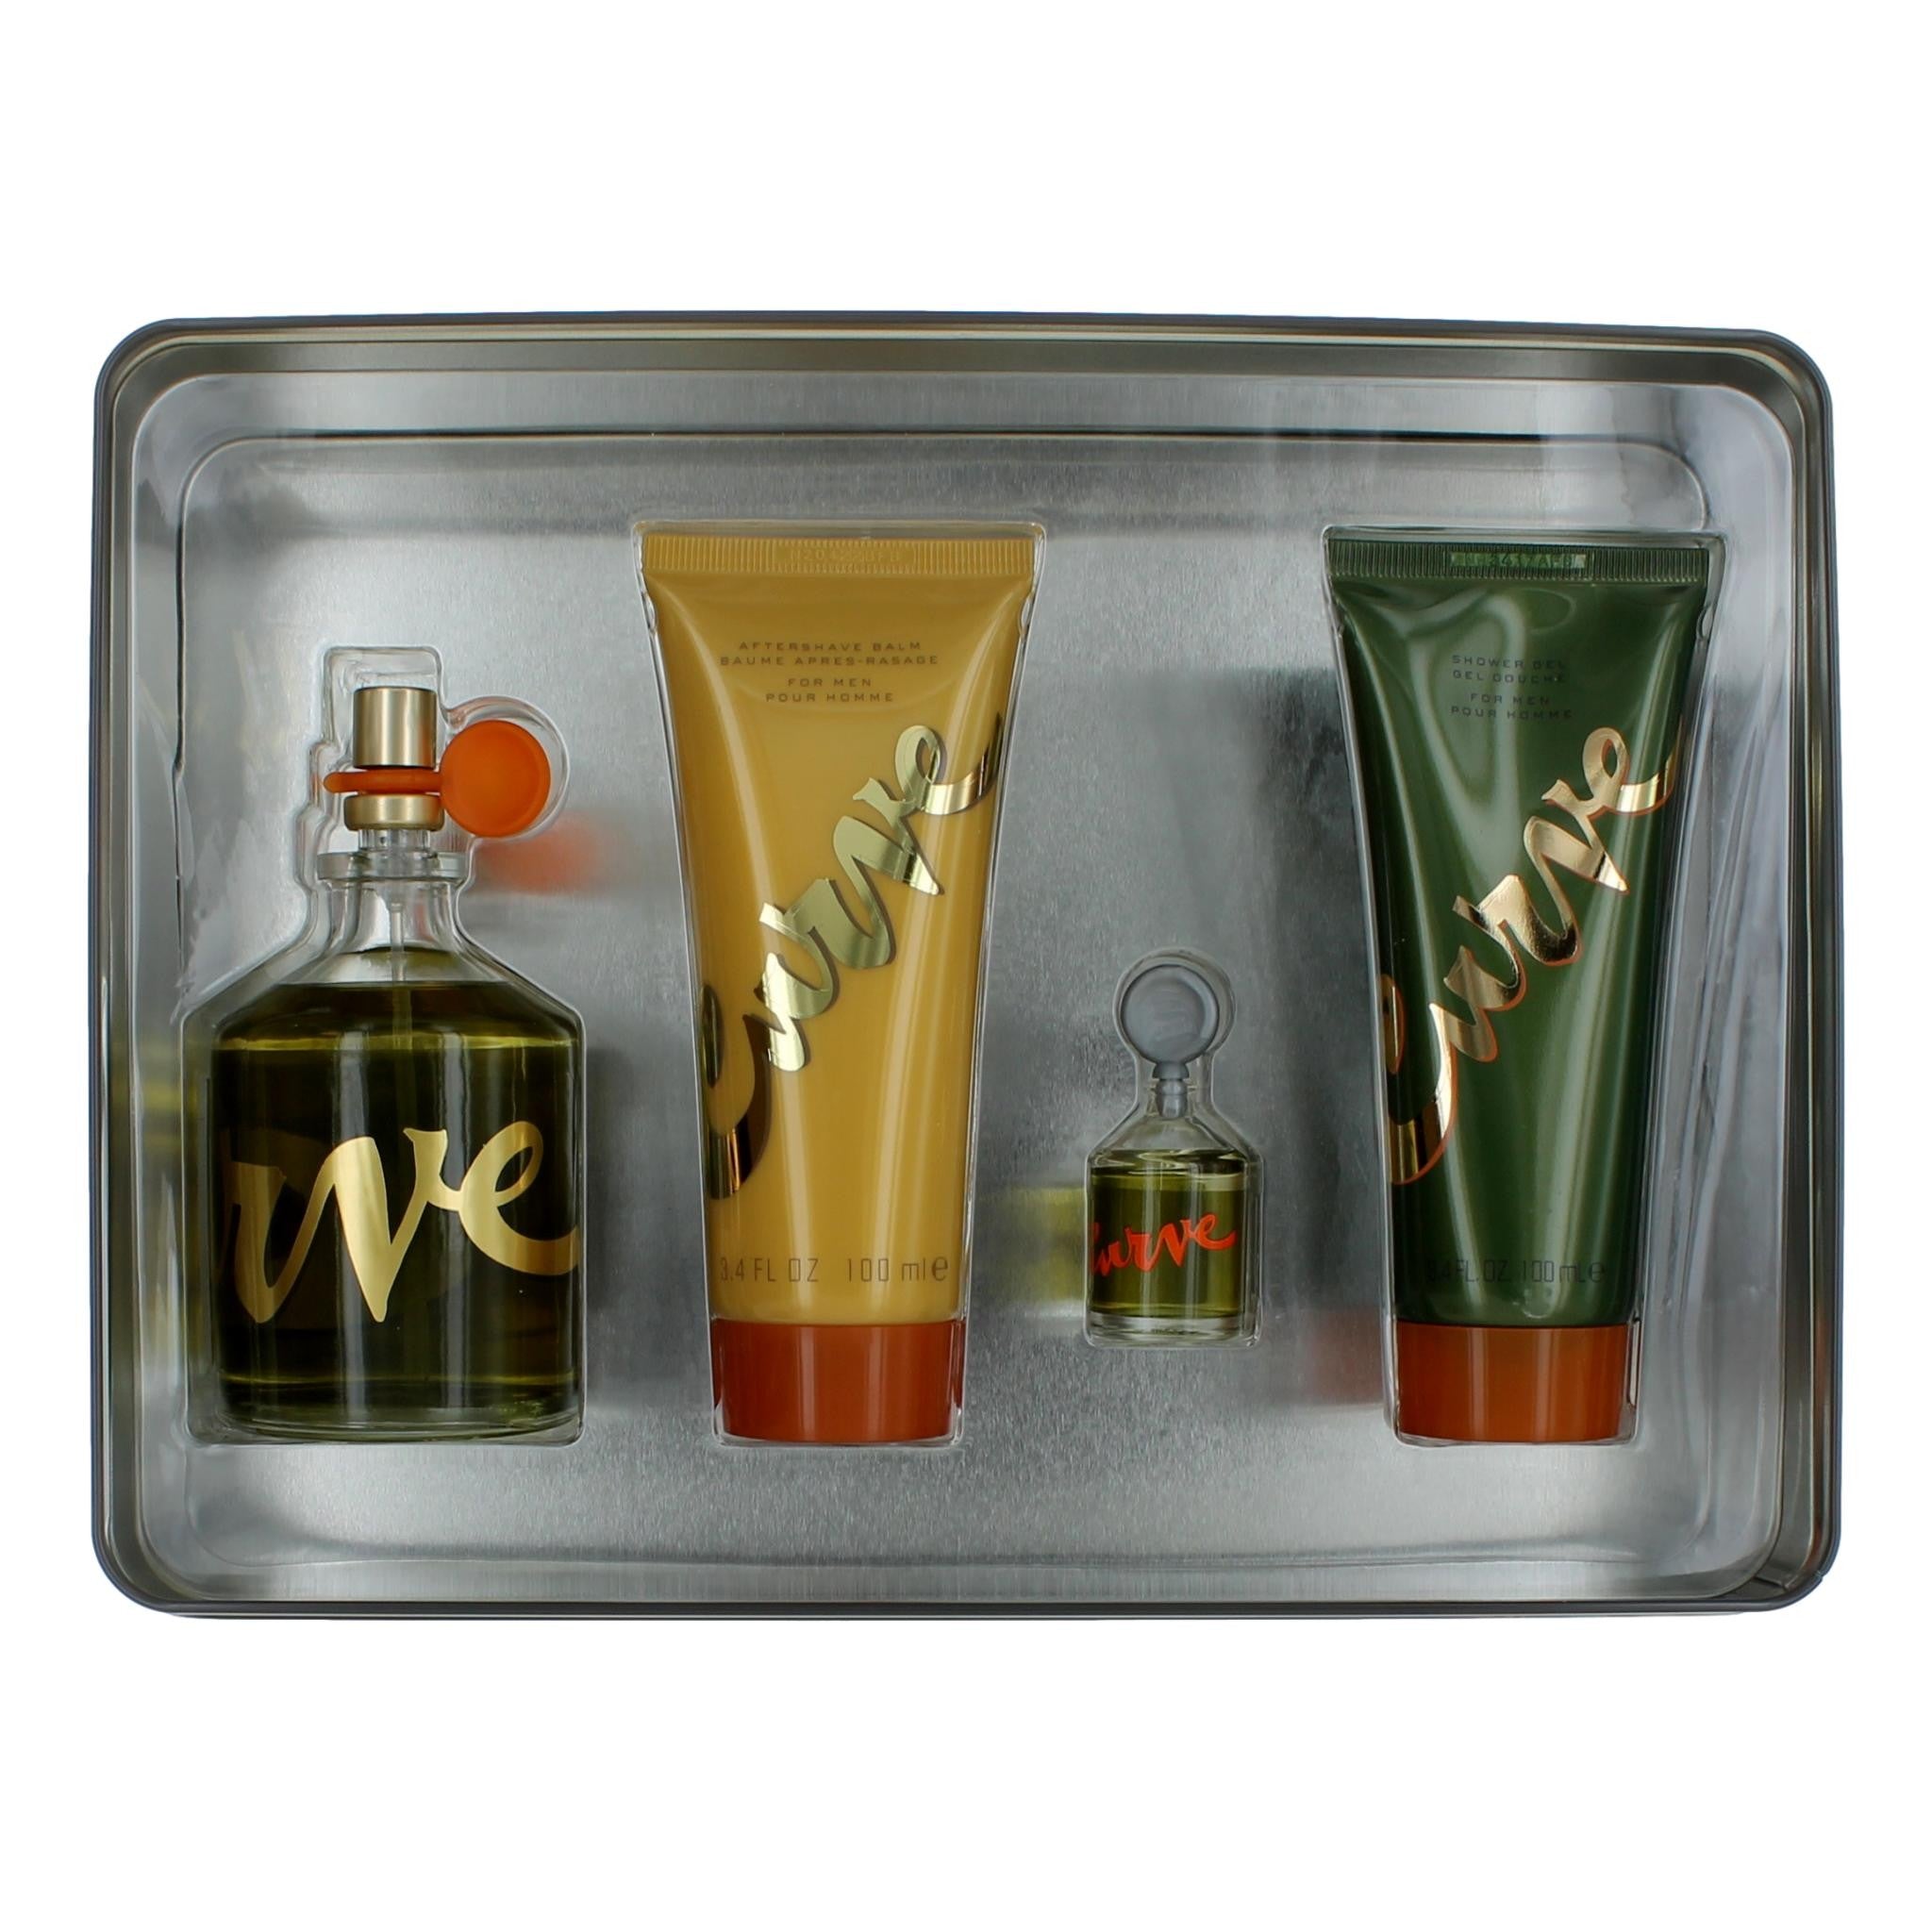 Bottle of Curve by Liz Claiborne, 4 Piece Gift Set for Men with 4.2 oz In A Tin Box